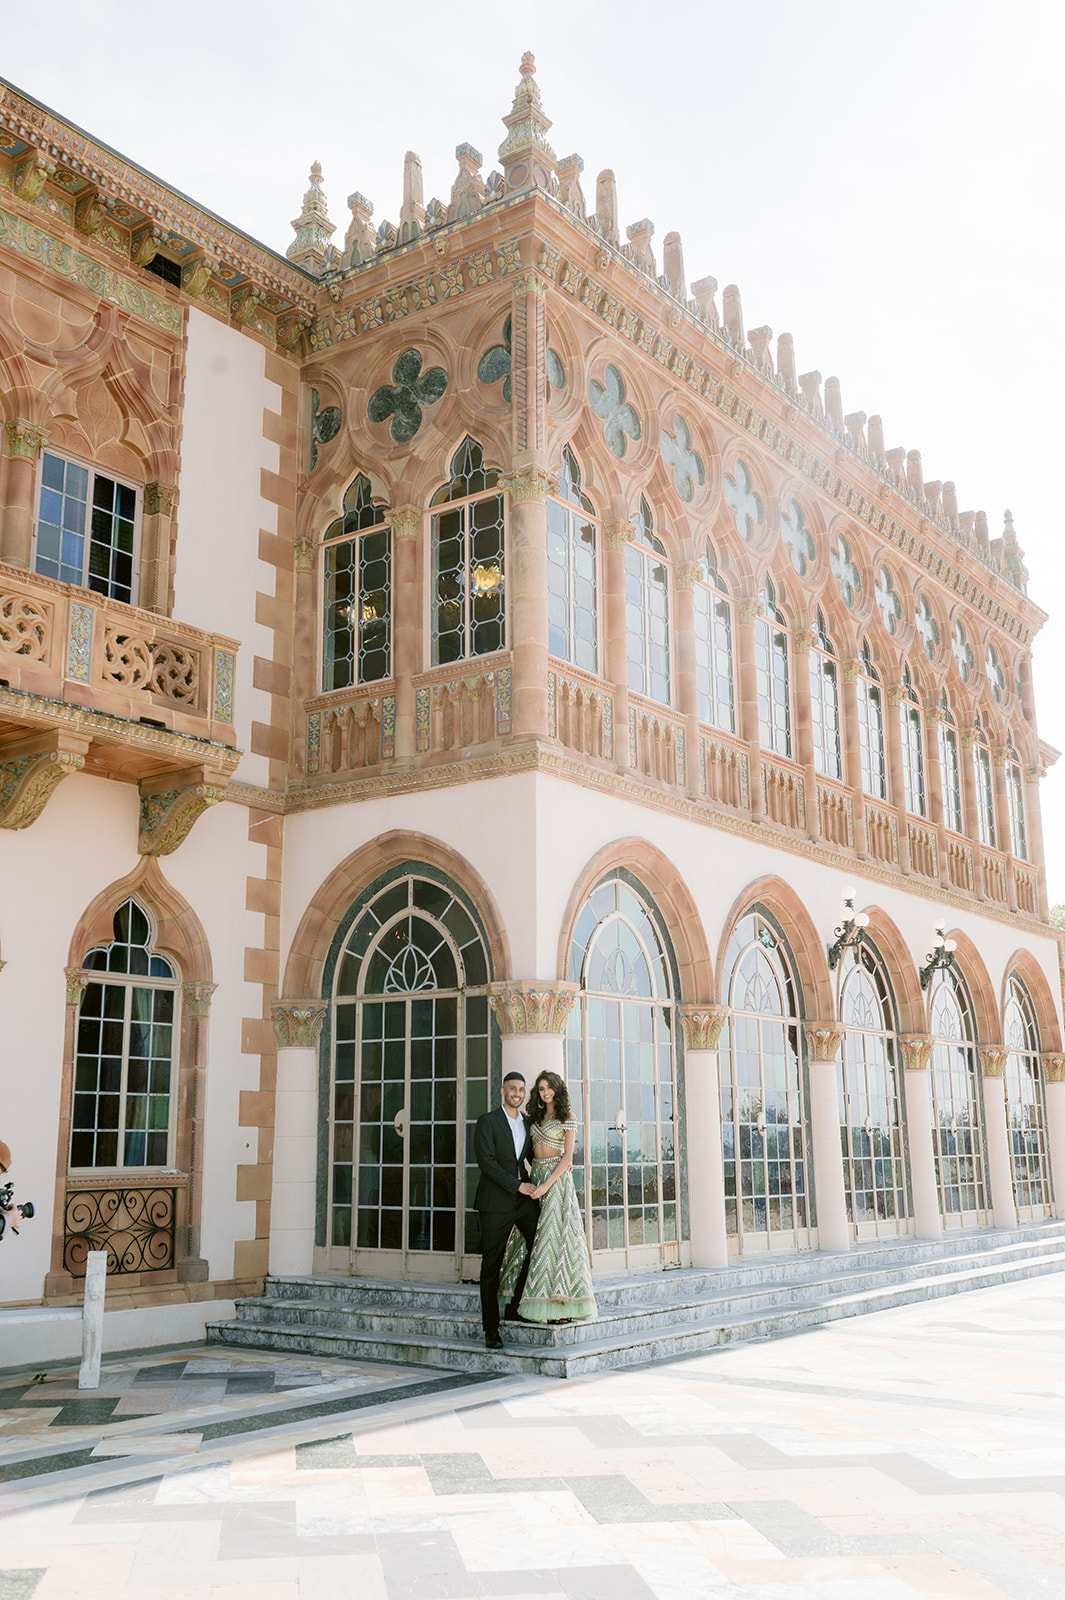 "Ringling Museum engagement shoot captures the beauty of Indian attire and stunning architecture"
